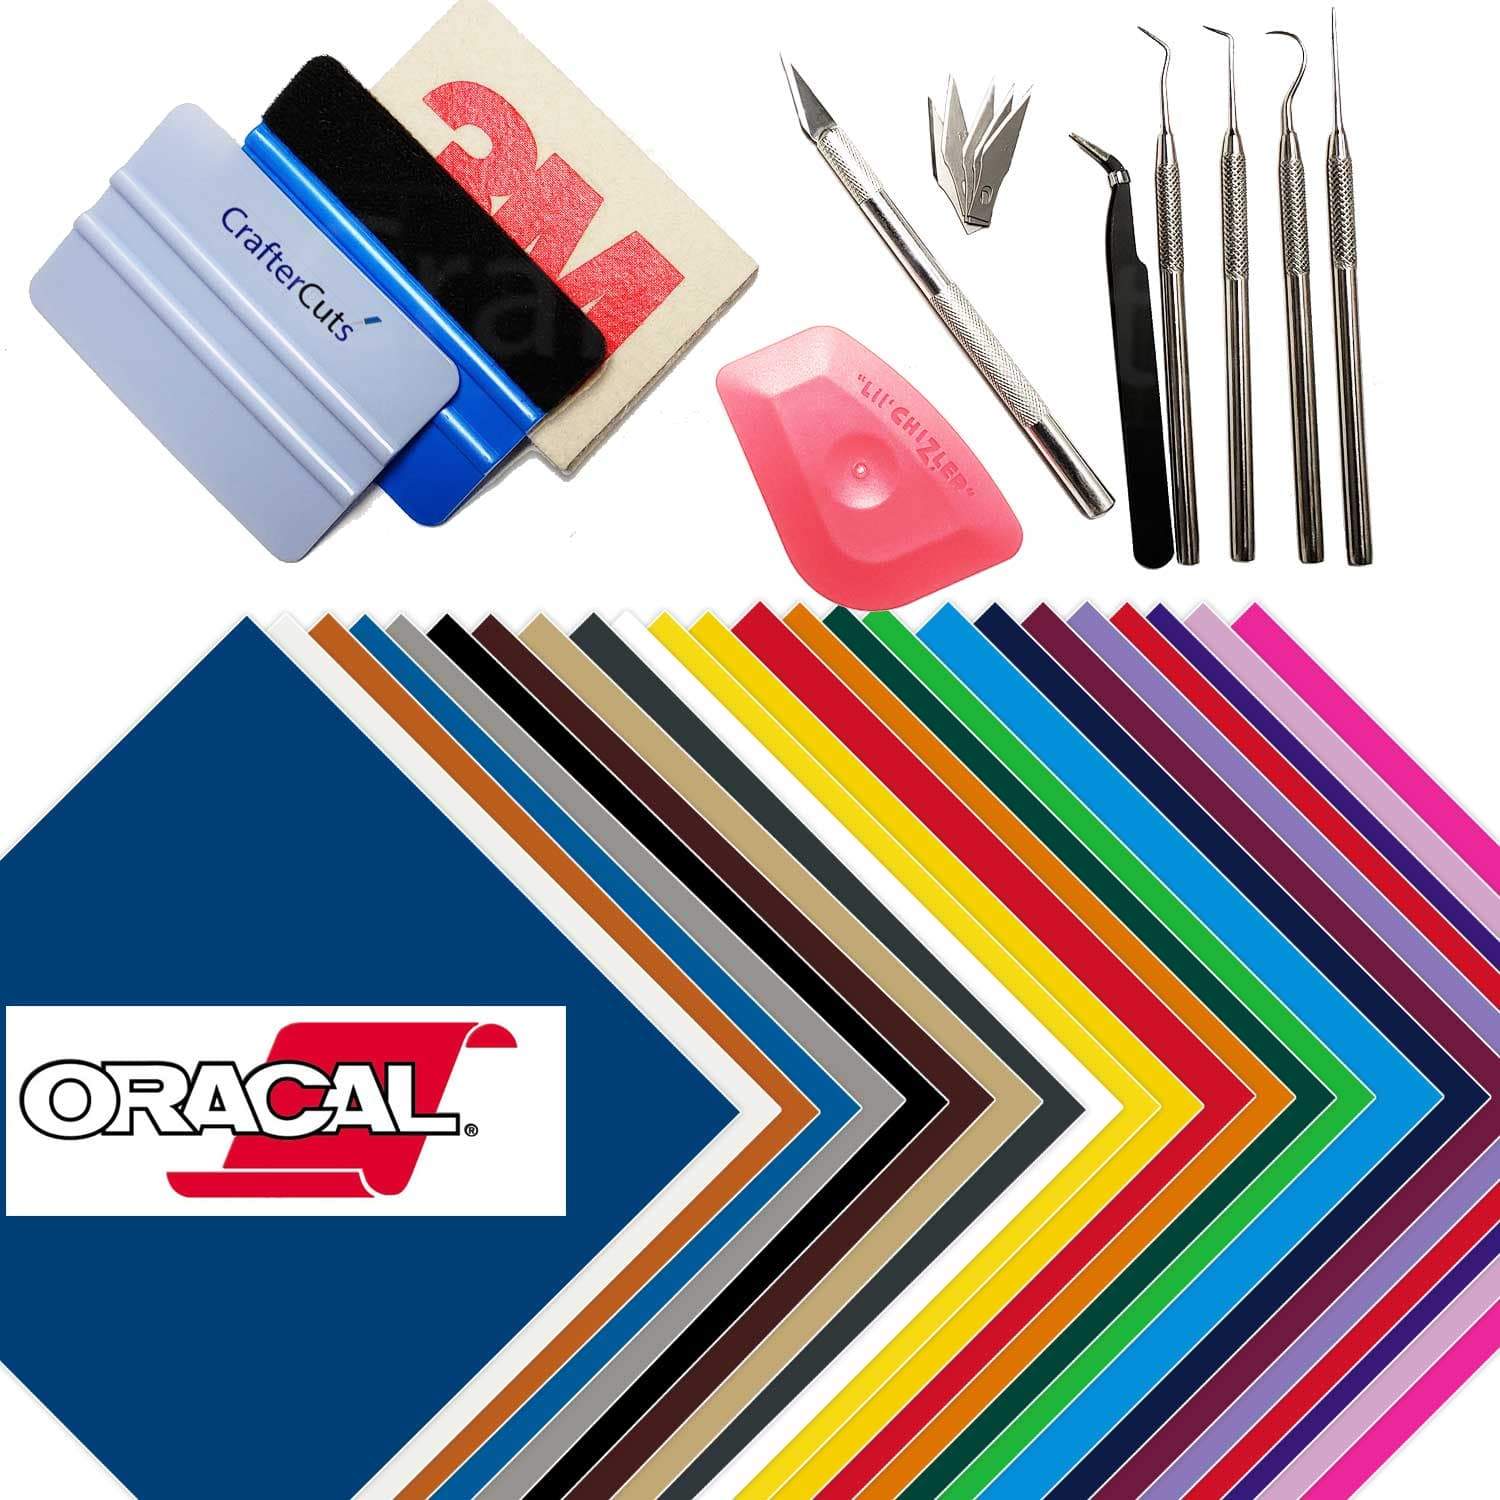 craftercuts Tools Oracal 651 24 Sheet Sampler Pack with CrafterCuts Deluxe Vinyl Tool Kit